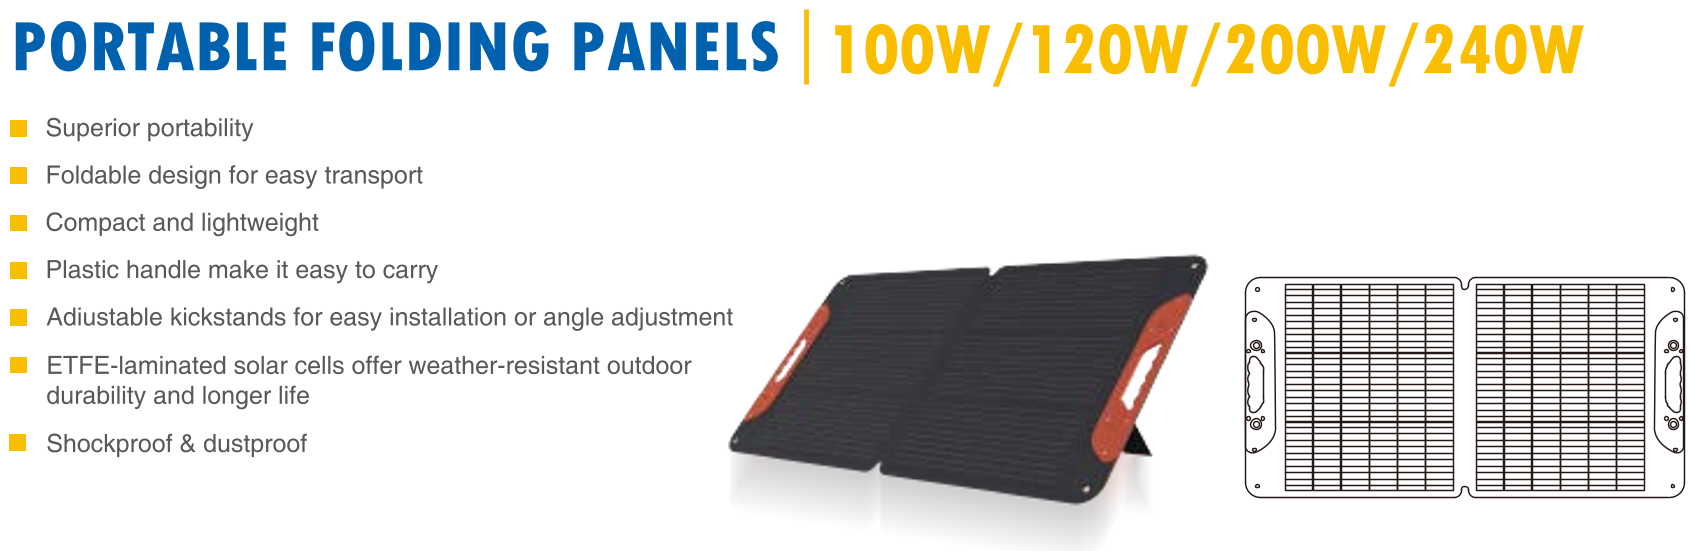 Portable solar panel foldable 60w 80w 100w 120w USB DC port solar panel system waterproof and camping solar panel